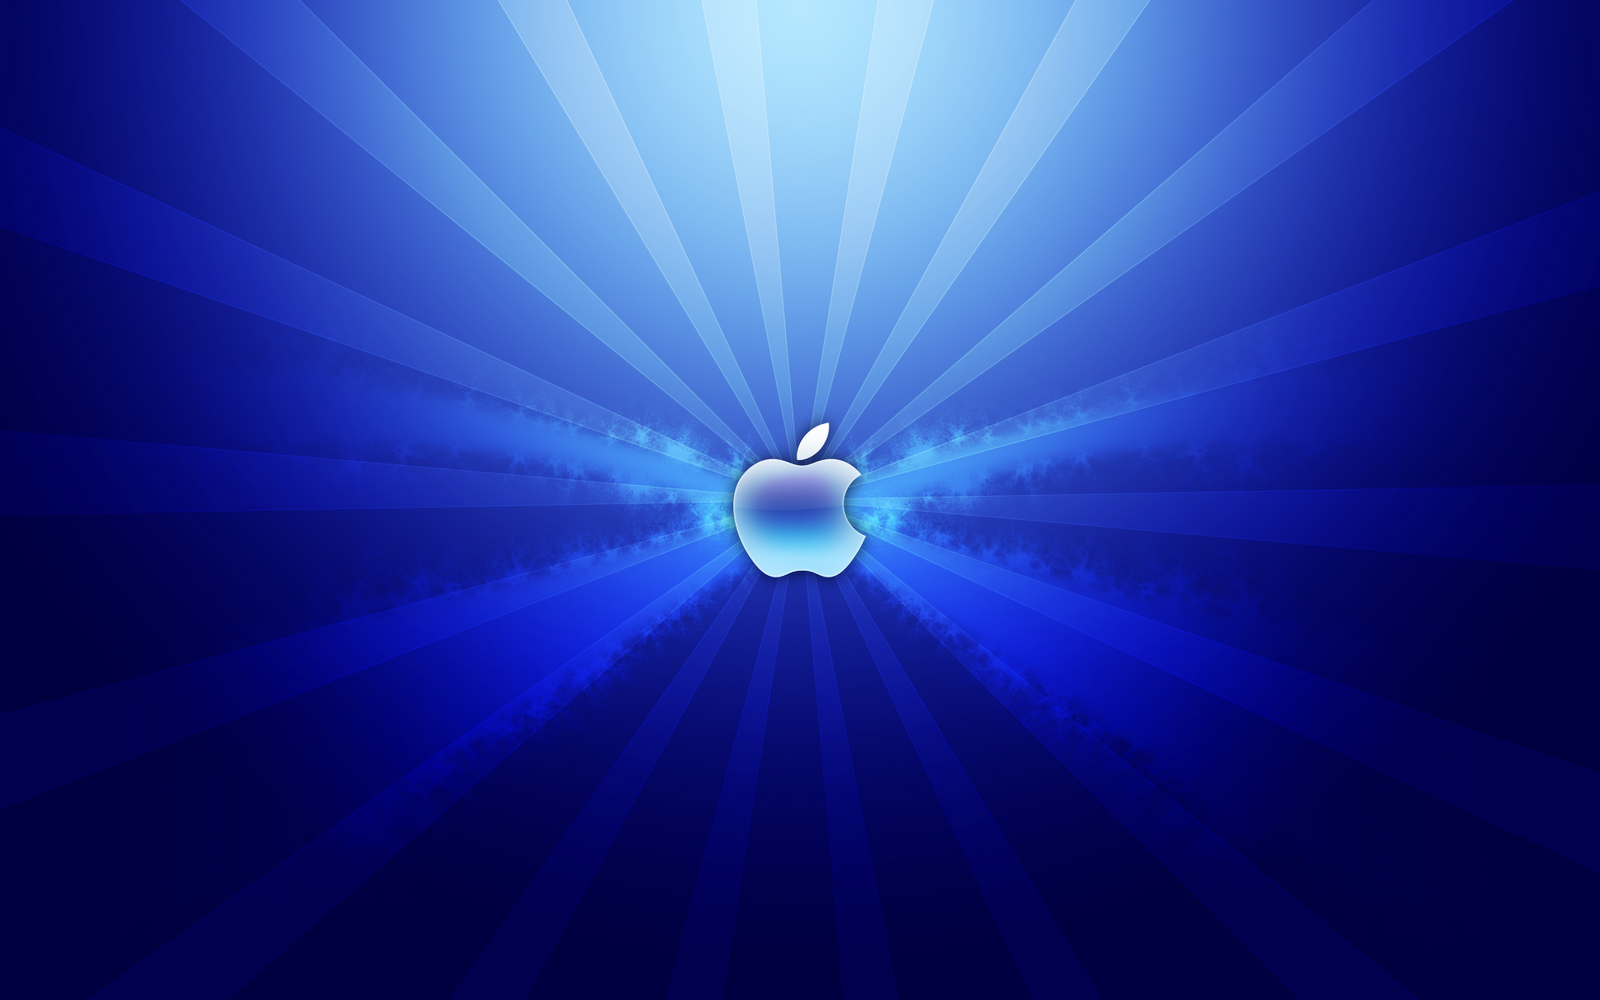 Blue Apple Laptop Wallpaper On This Cool Website